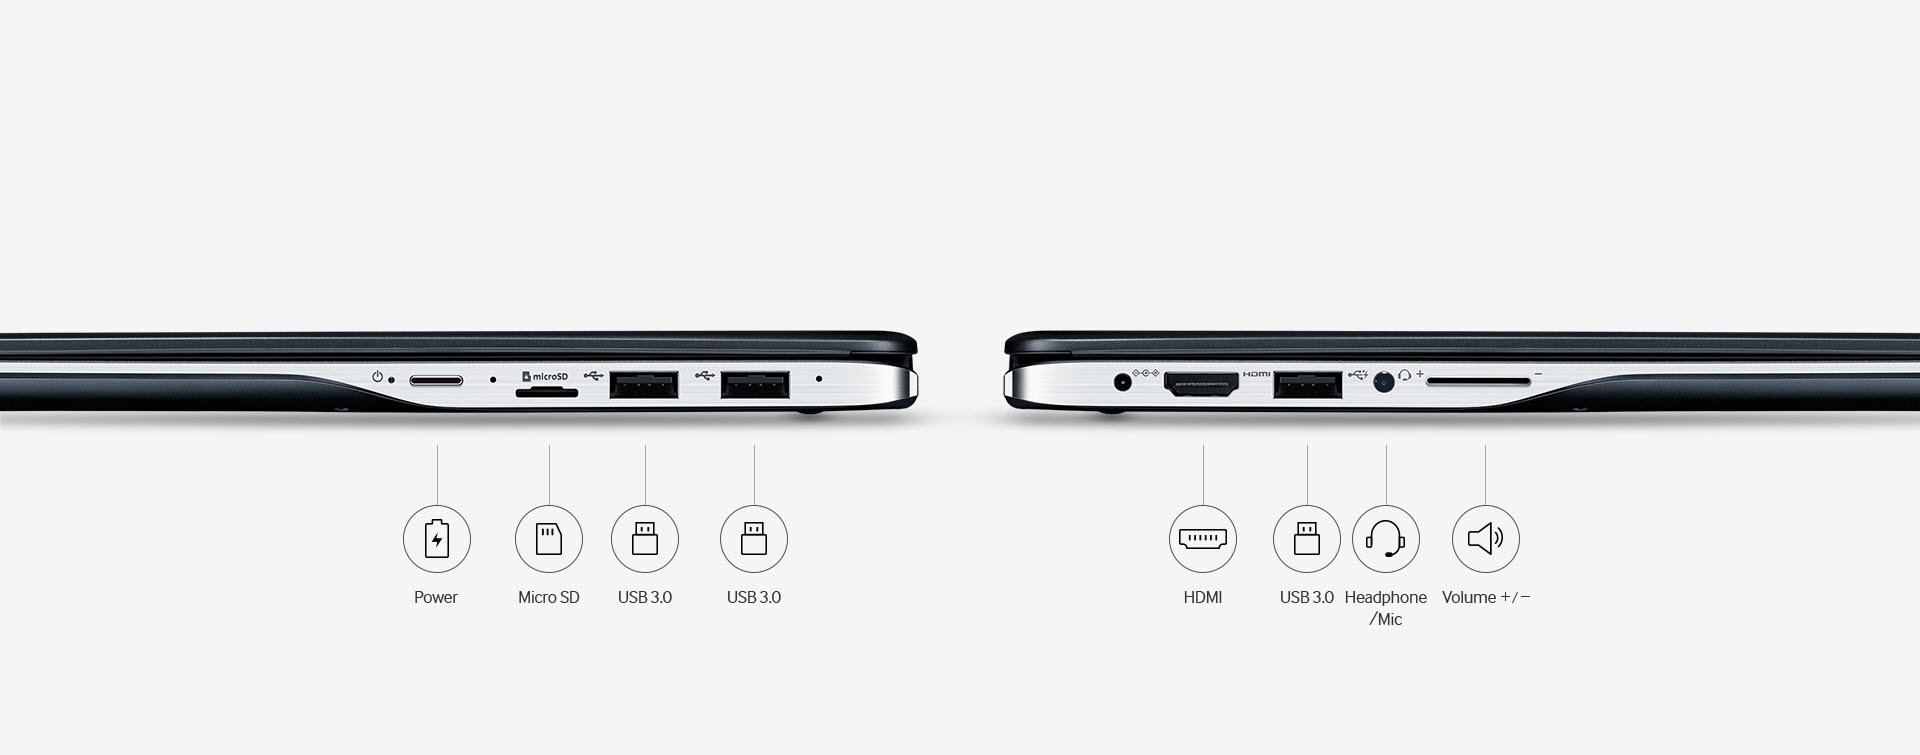 An image showing the Notebook 9 spin's various ports, including power, Micro SD, and USB 3.0 ports on the left, as well as HDMI, headphone/mic ports and a volume button on the right.